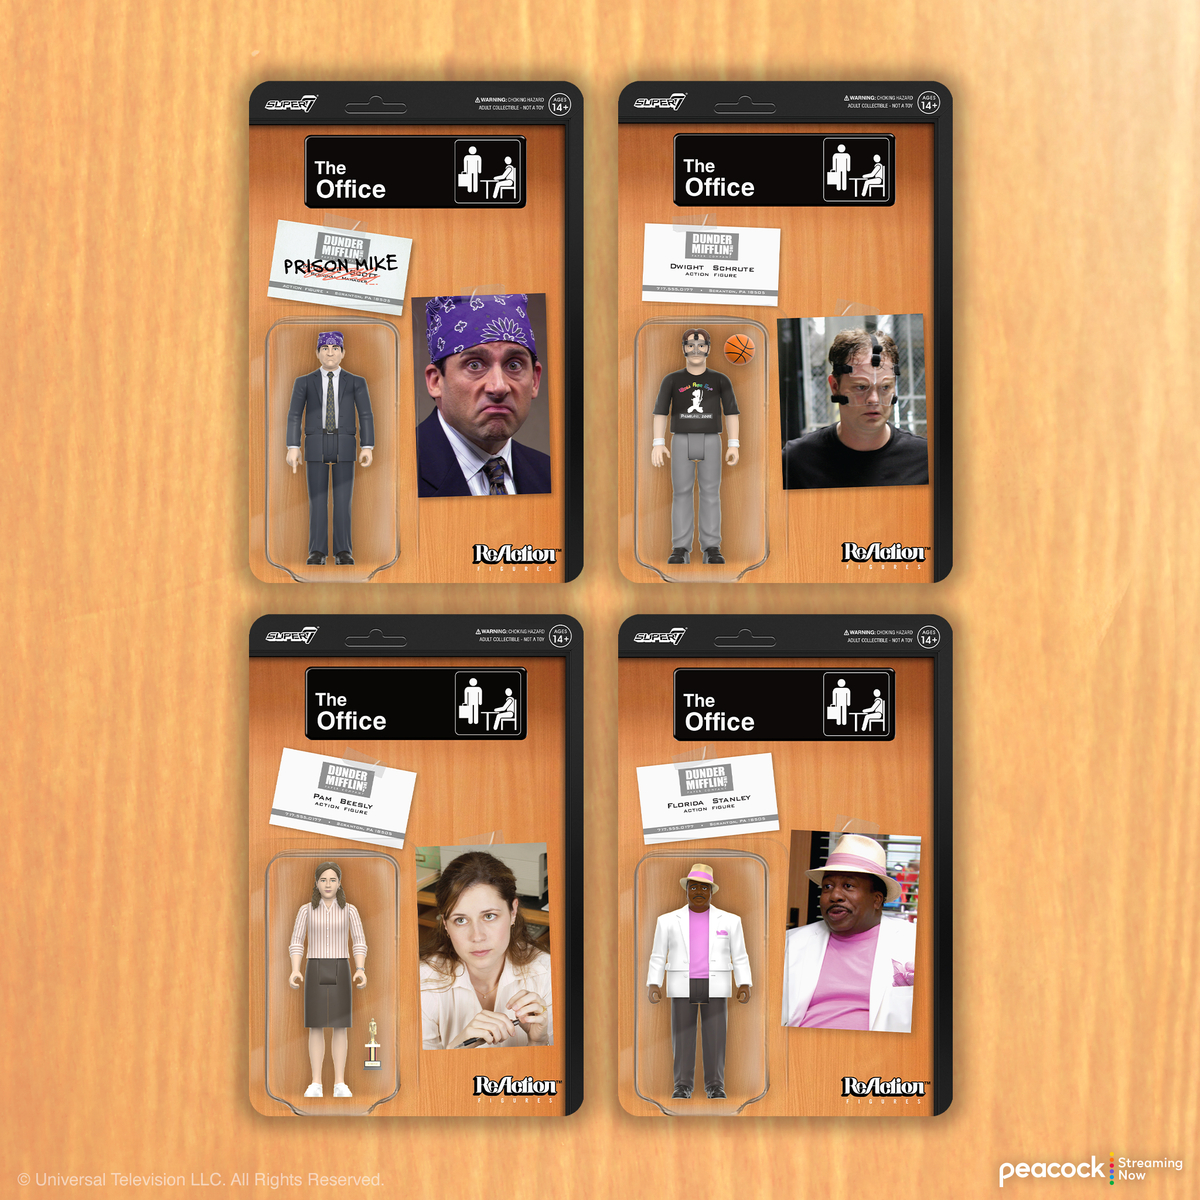 🎉 GIVEAWAY ALERT! 🎉 Attention, Dunder Mifflin fans! We're giving away the complete set of The Office ReAction Figures Wave 2. 📎📁 🚨 Here's how to enter: 1. Like this post 2. Follow us @super7store 3. Comment with a GIF or your favorite moment from The Office